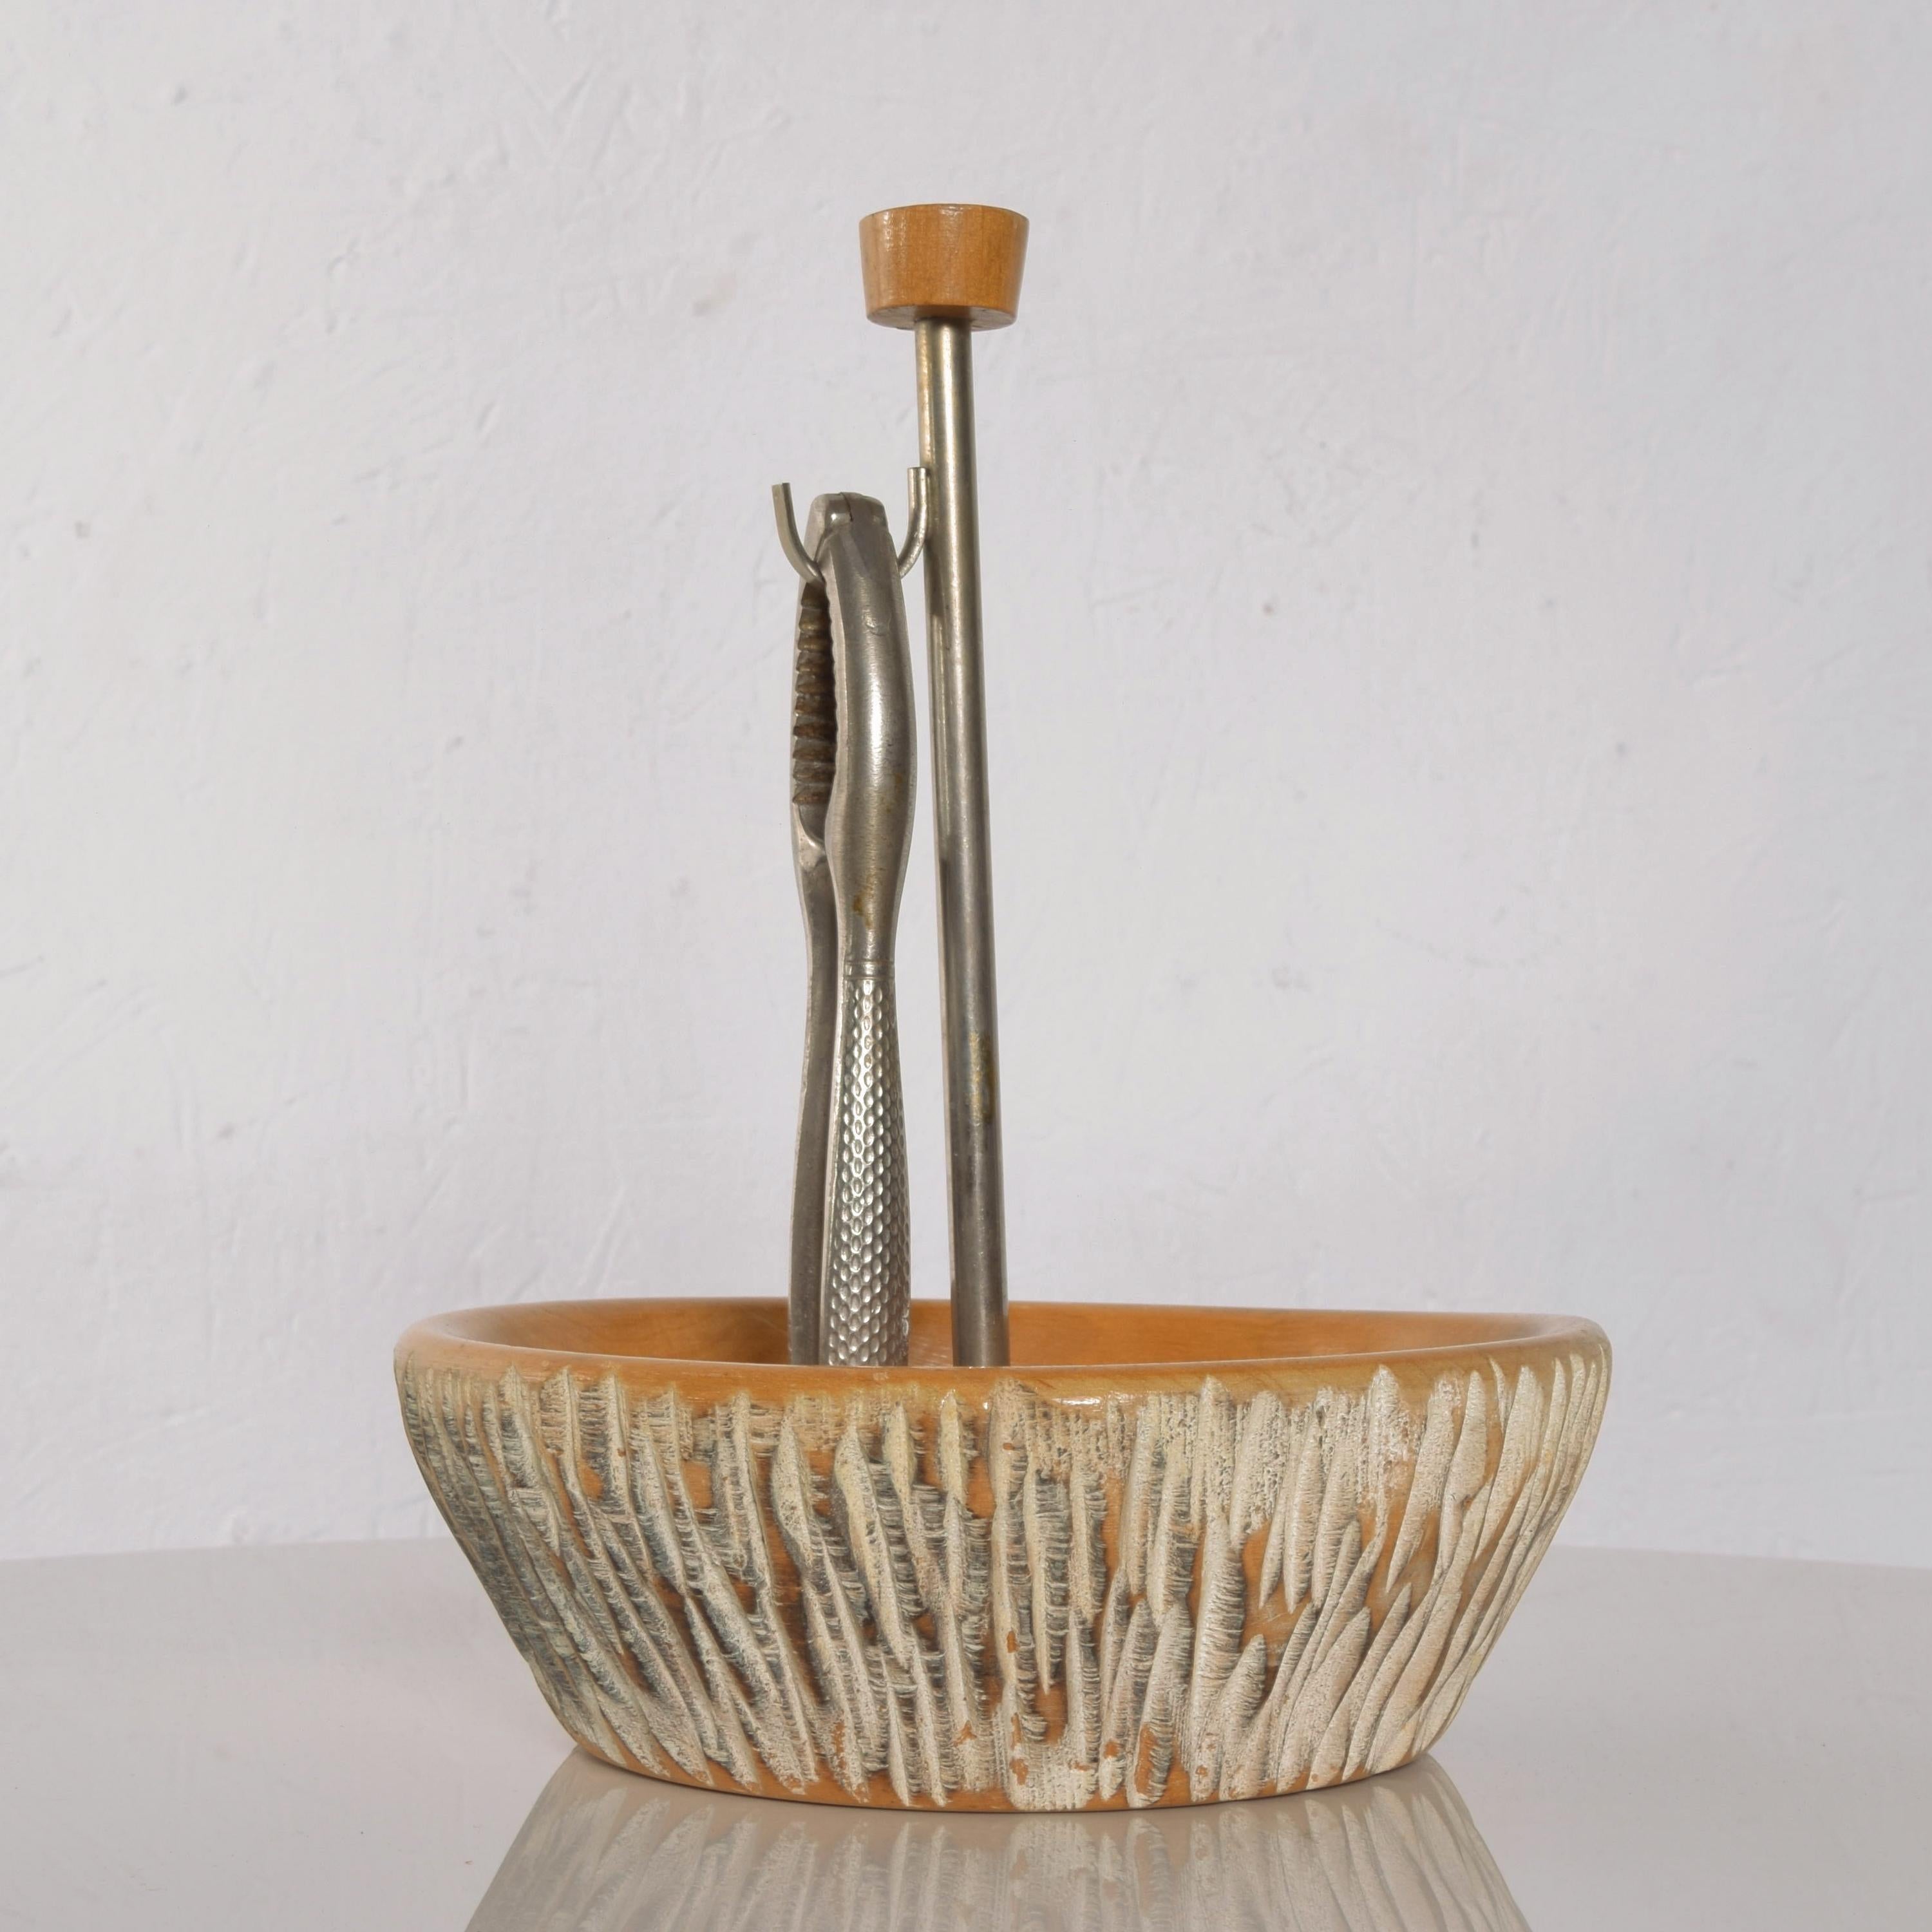 Nutcracker Bowl
Italy Aldo Tura Macabo wood nutcracker dish with stainless steel tool 1960s
Measures: 8 1/2